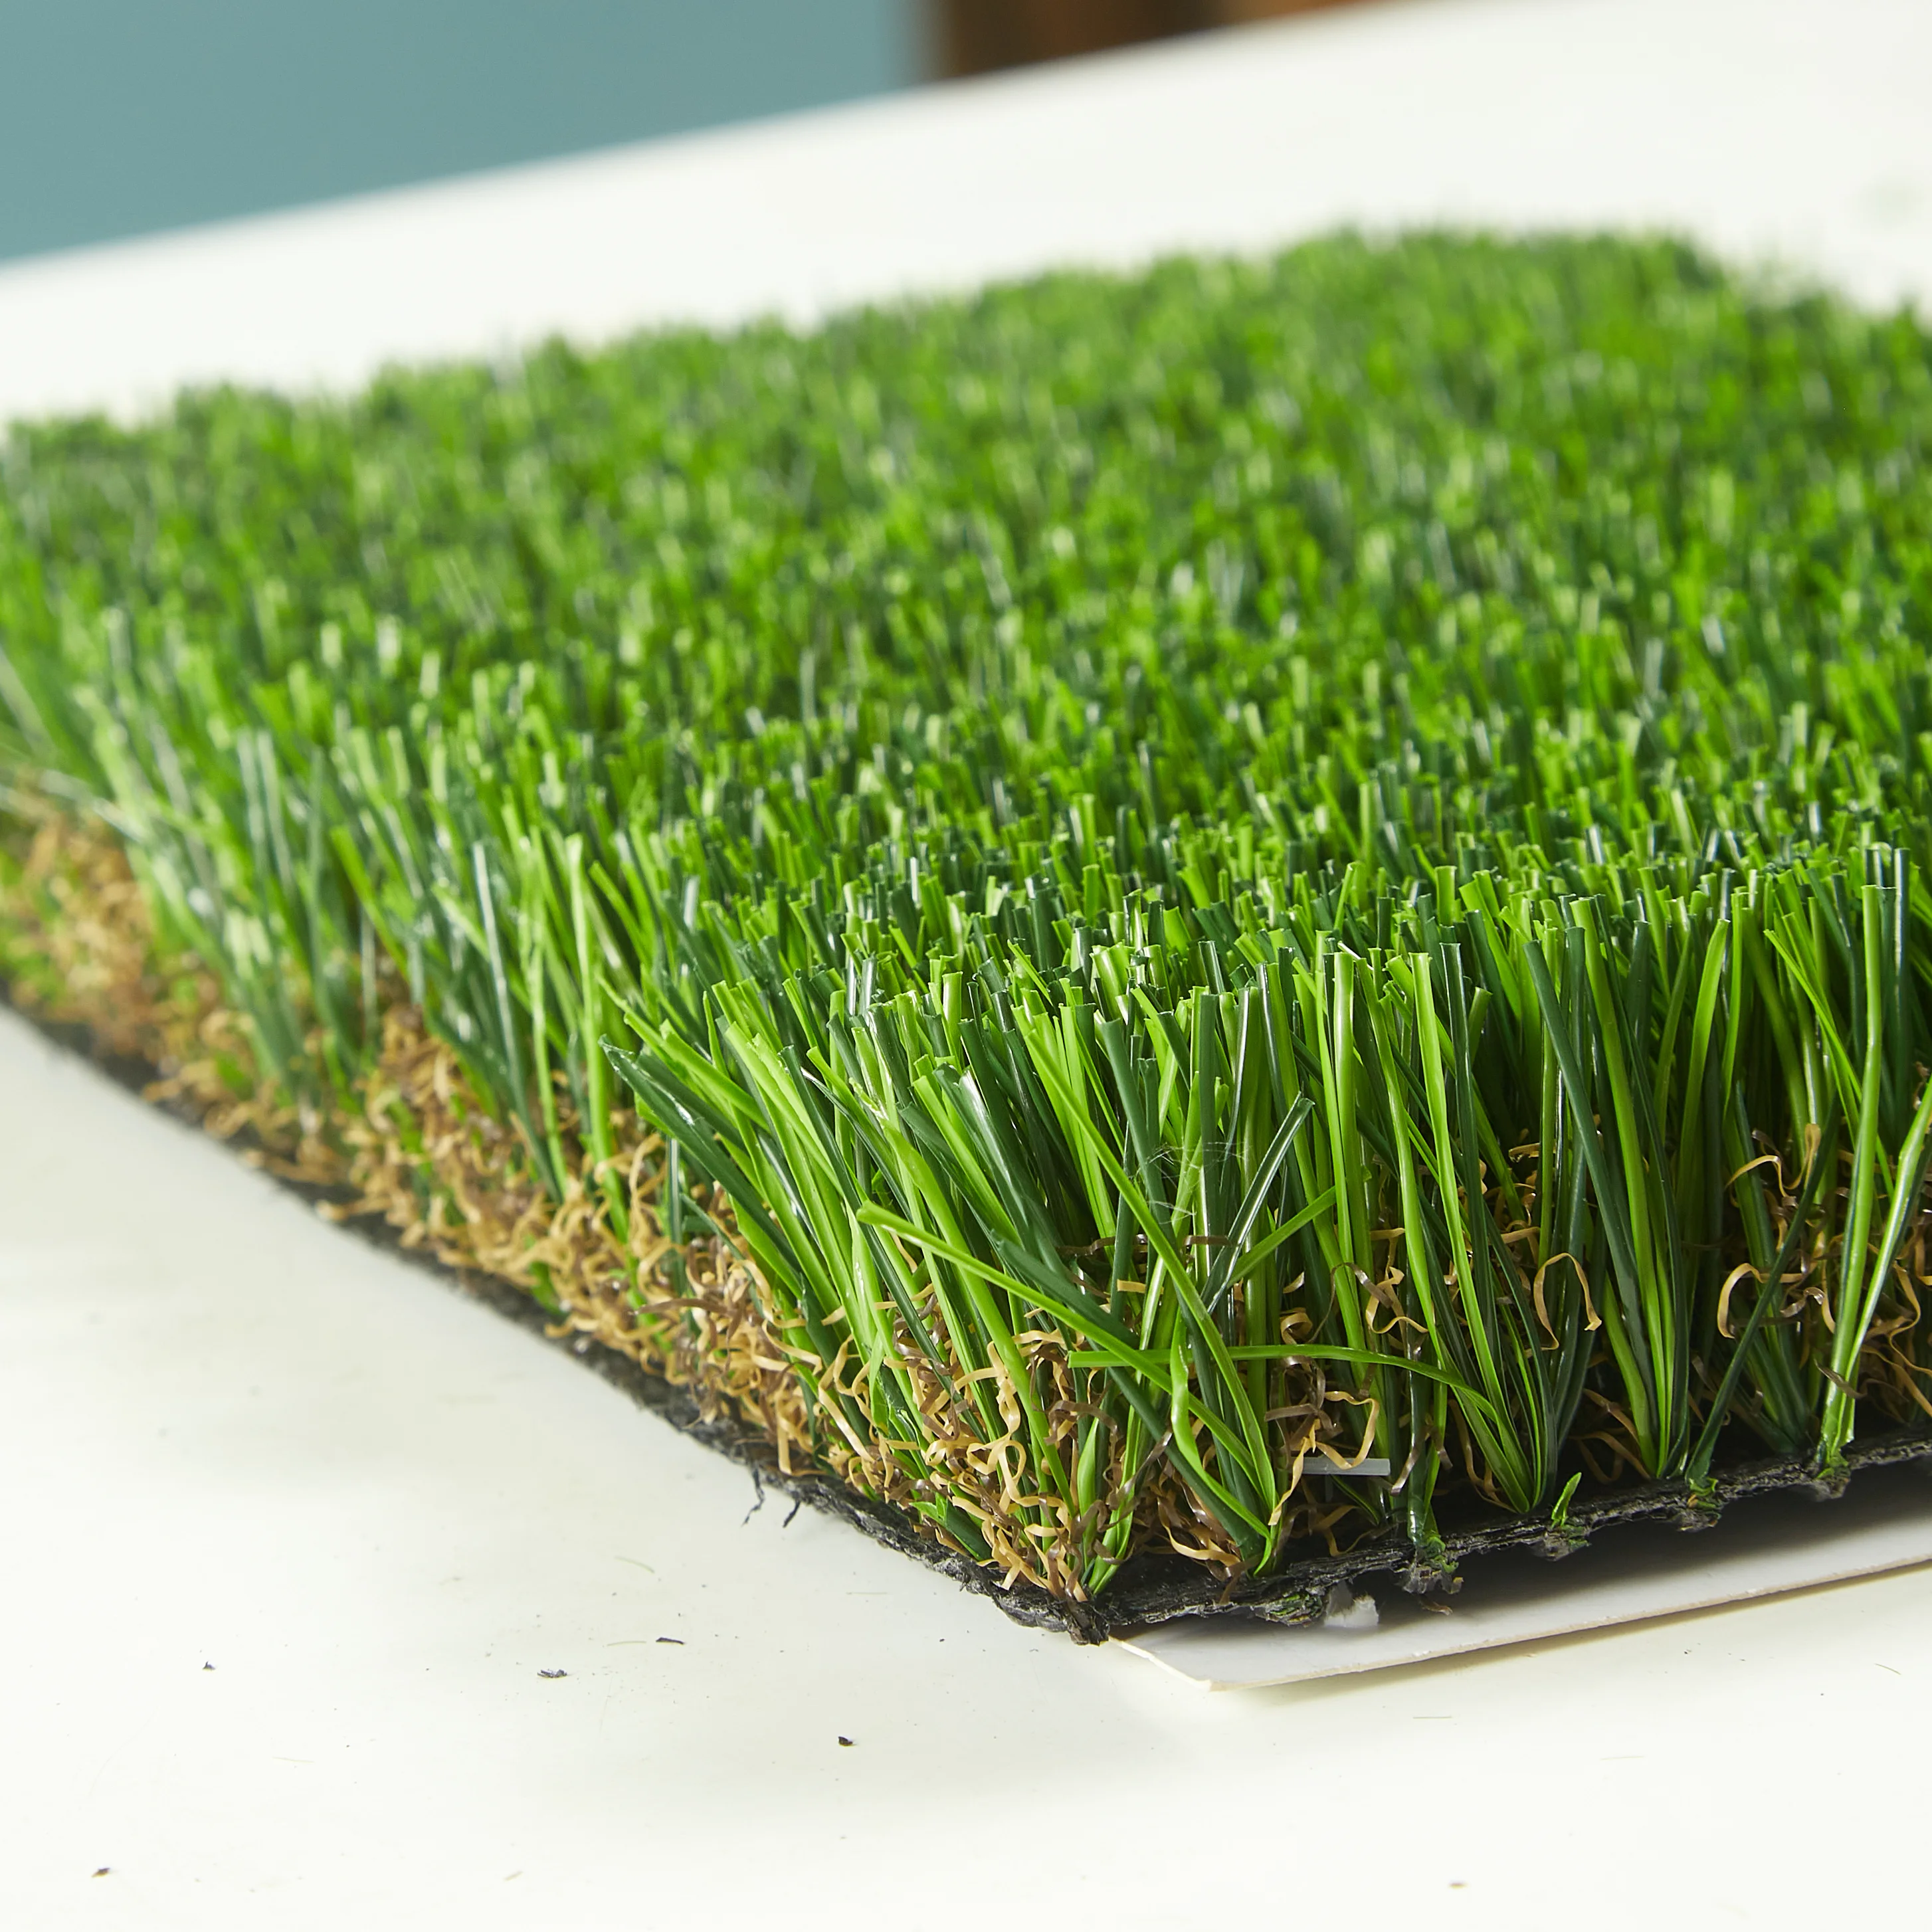 Factory Directly high quality Artificial turf grass tiles price / for Football Lawn / garden and sports flooring